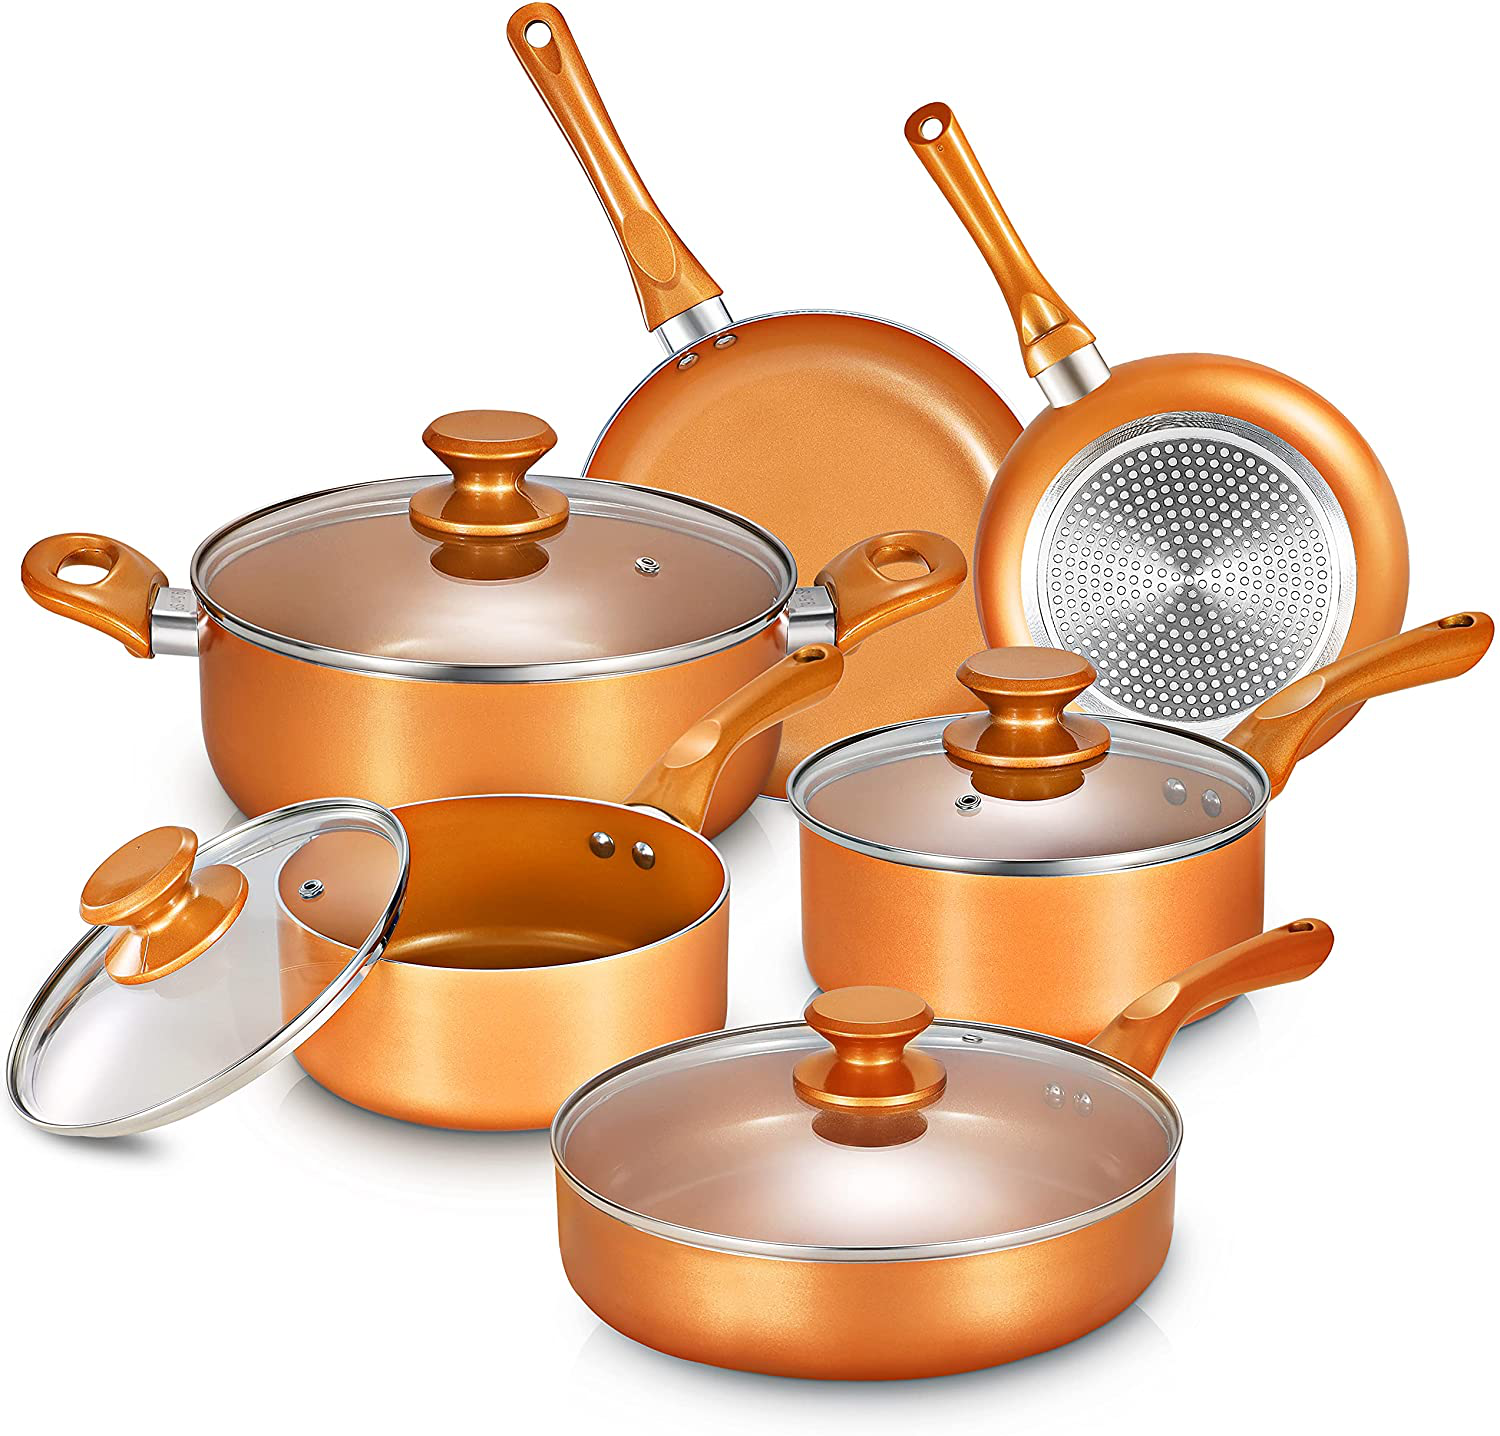 Copper pan with nonstick coating